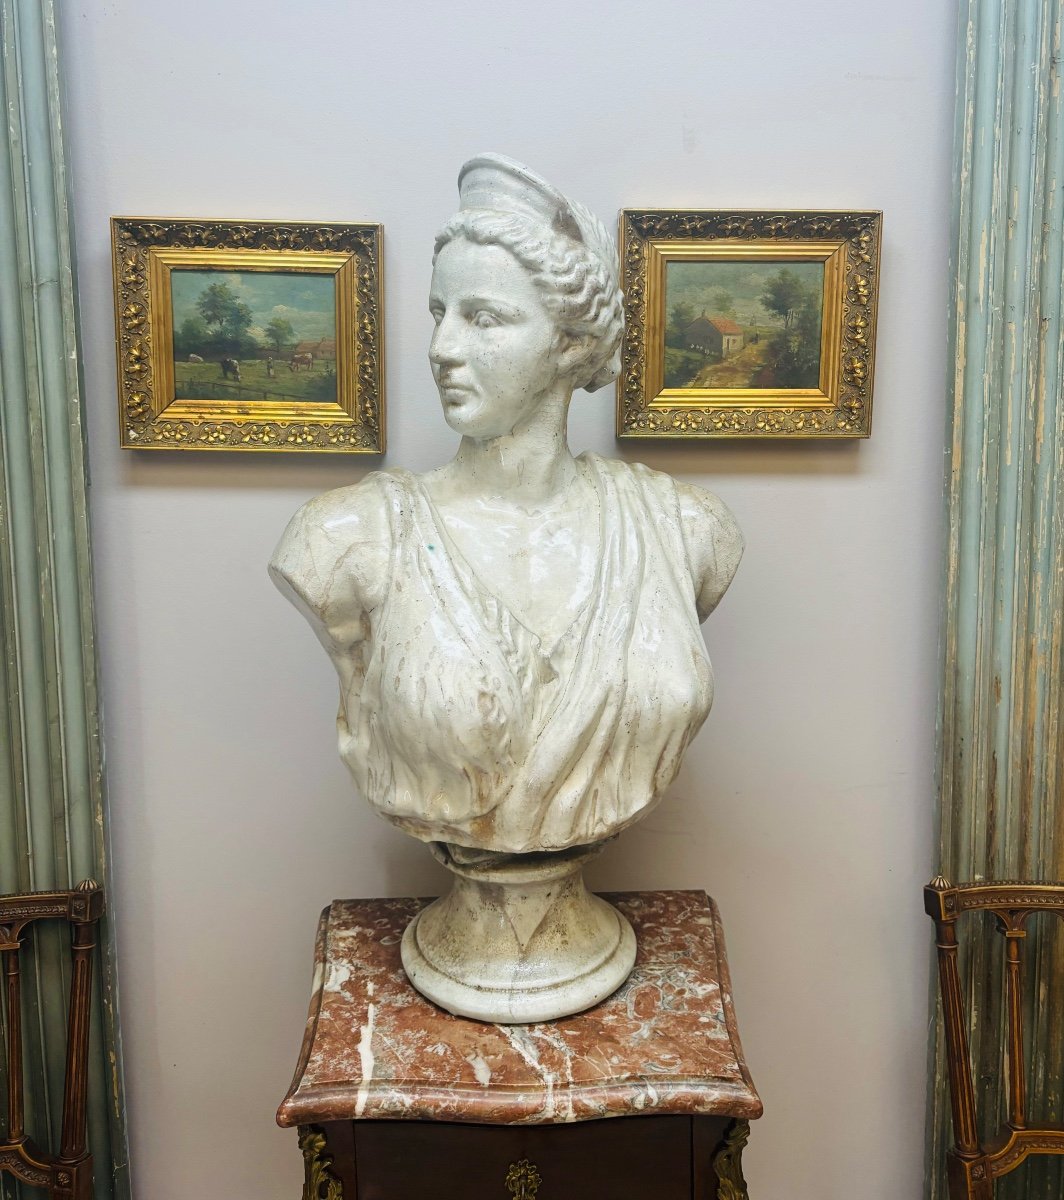 Large Bust Of A Woman In Cracked Earthenware From The 19th Century